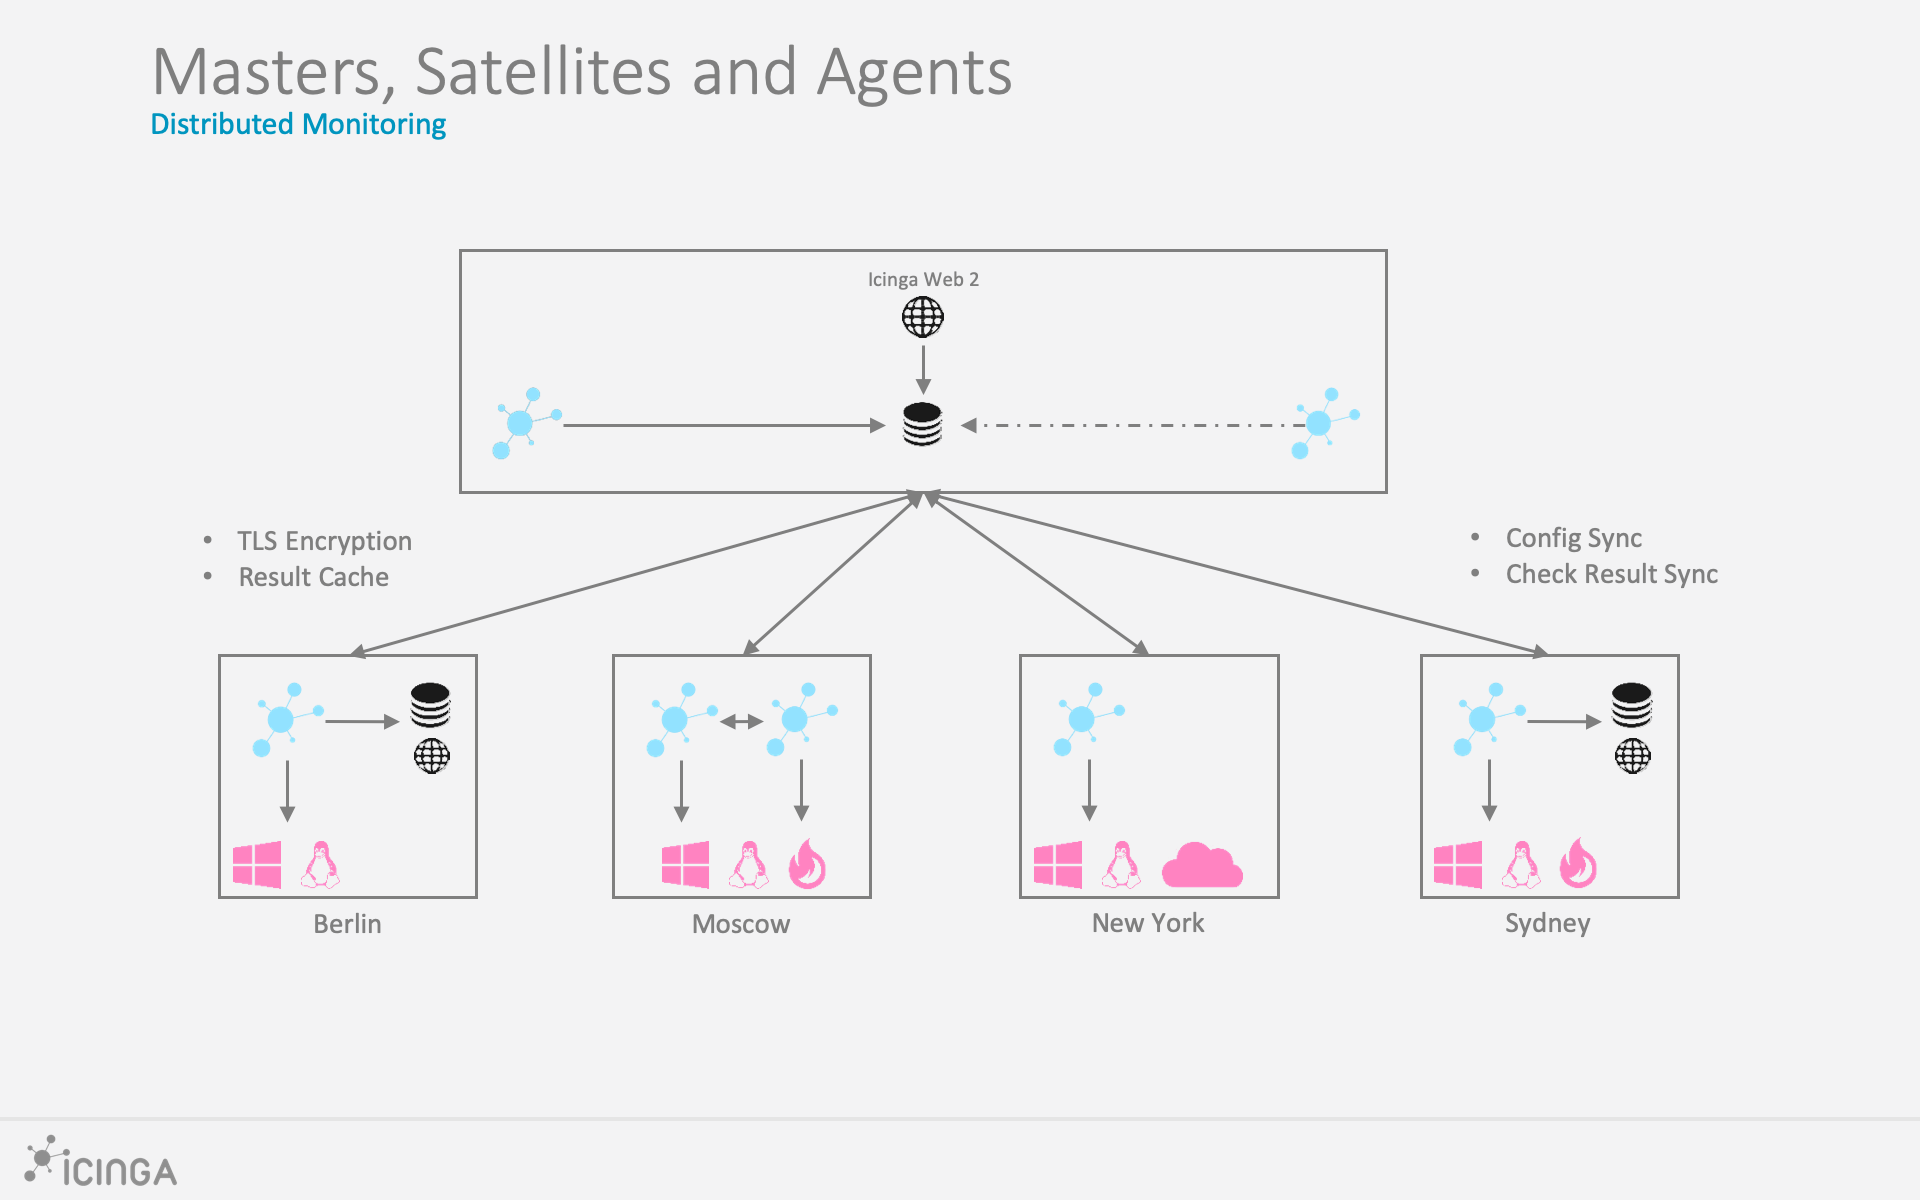 Icinga 2 Distributed Master and Satellites with Agents